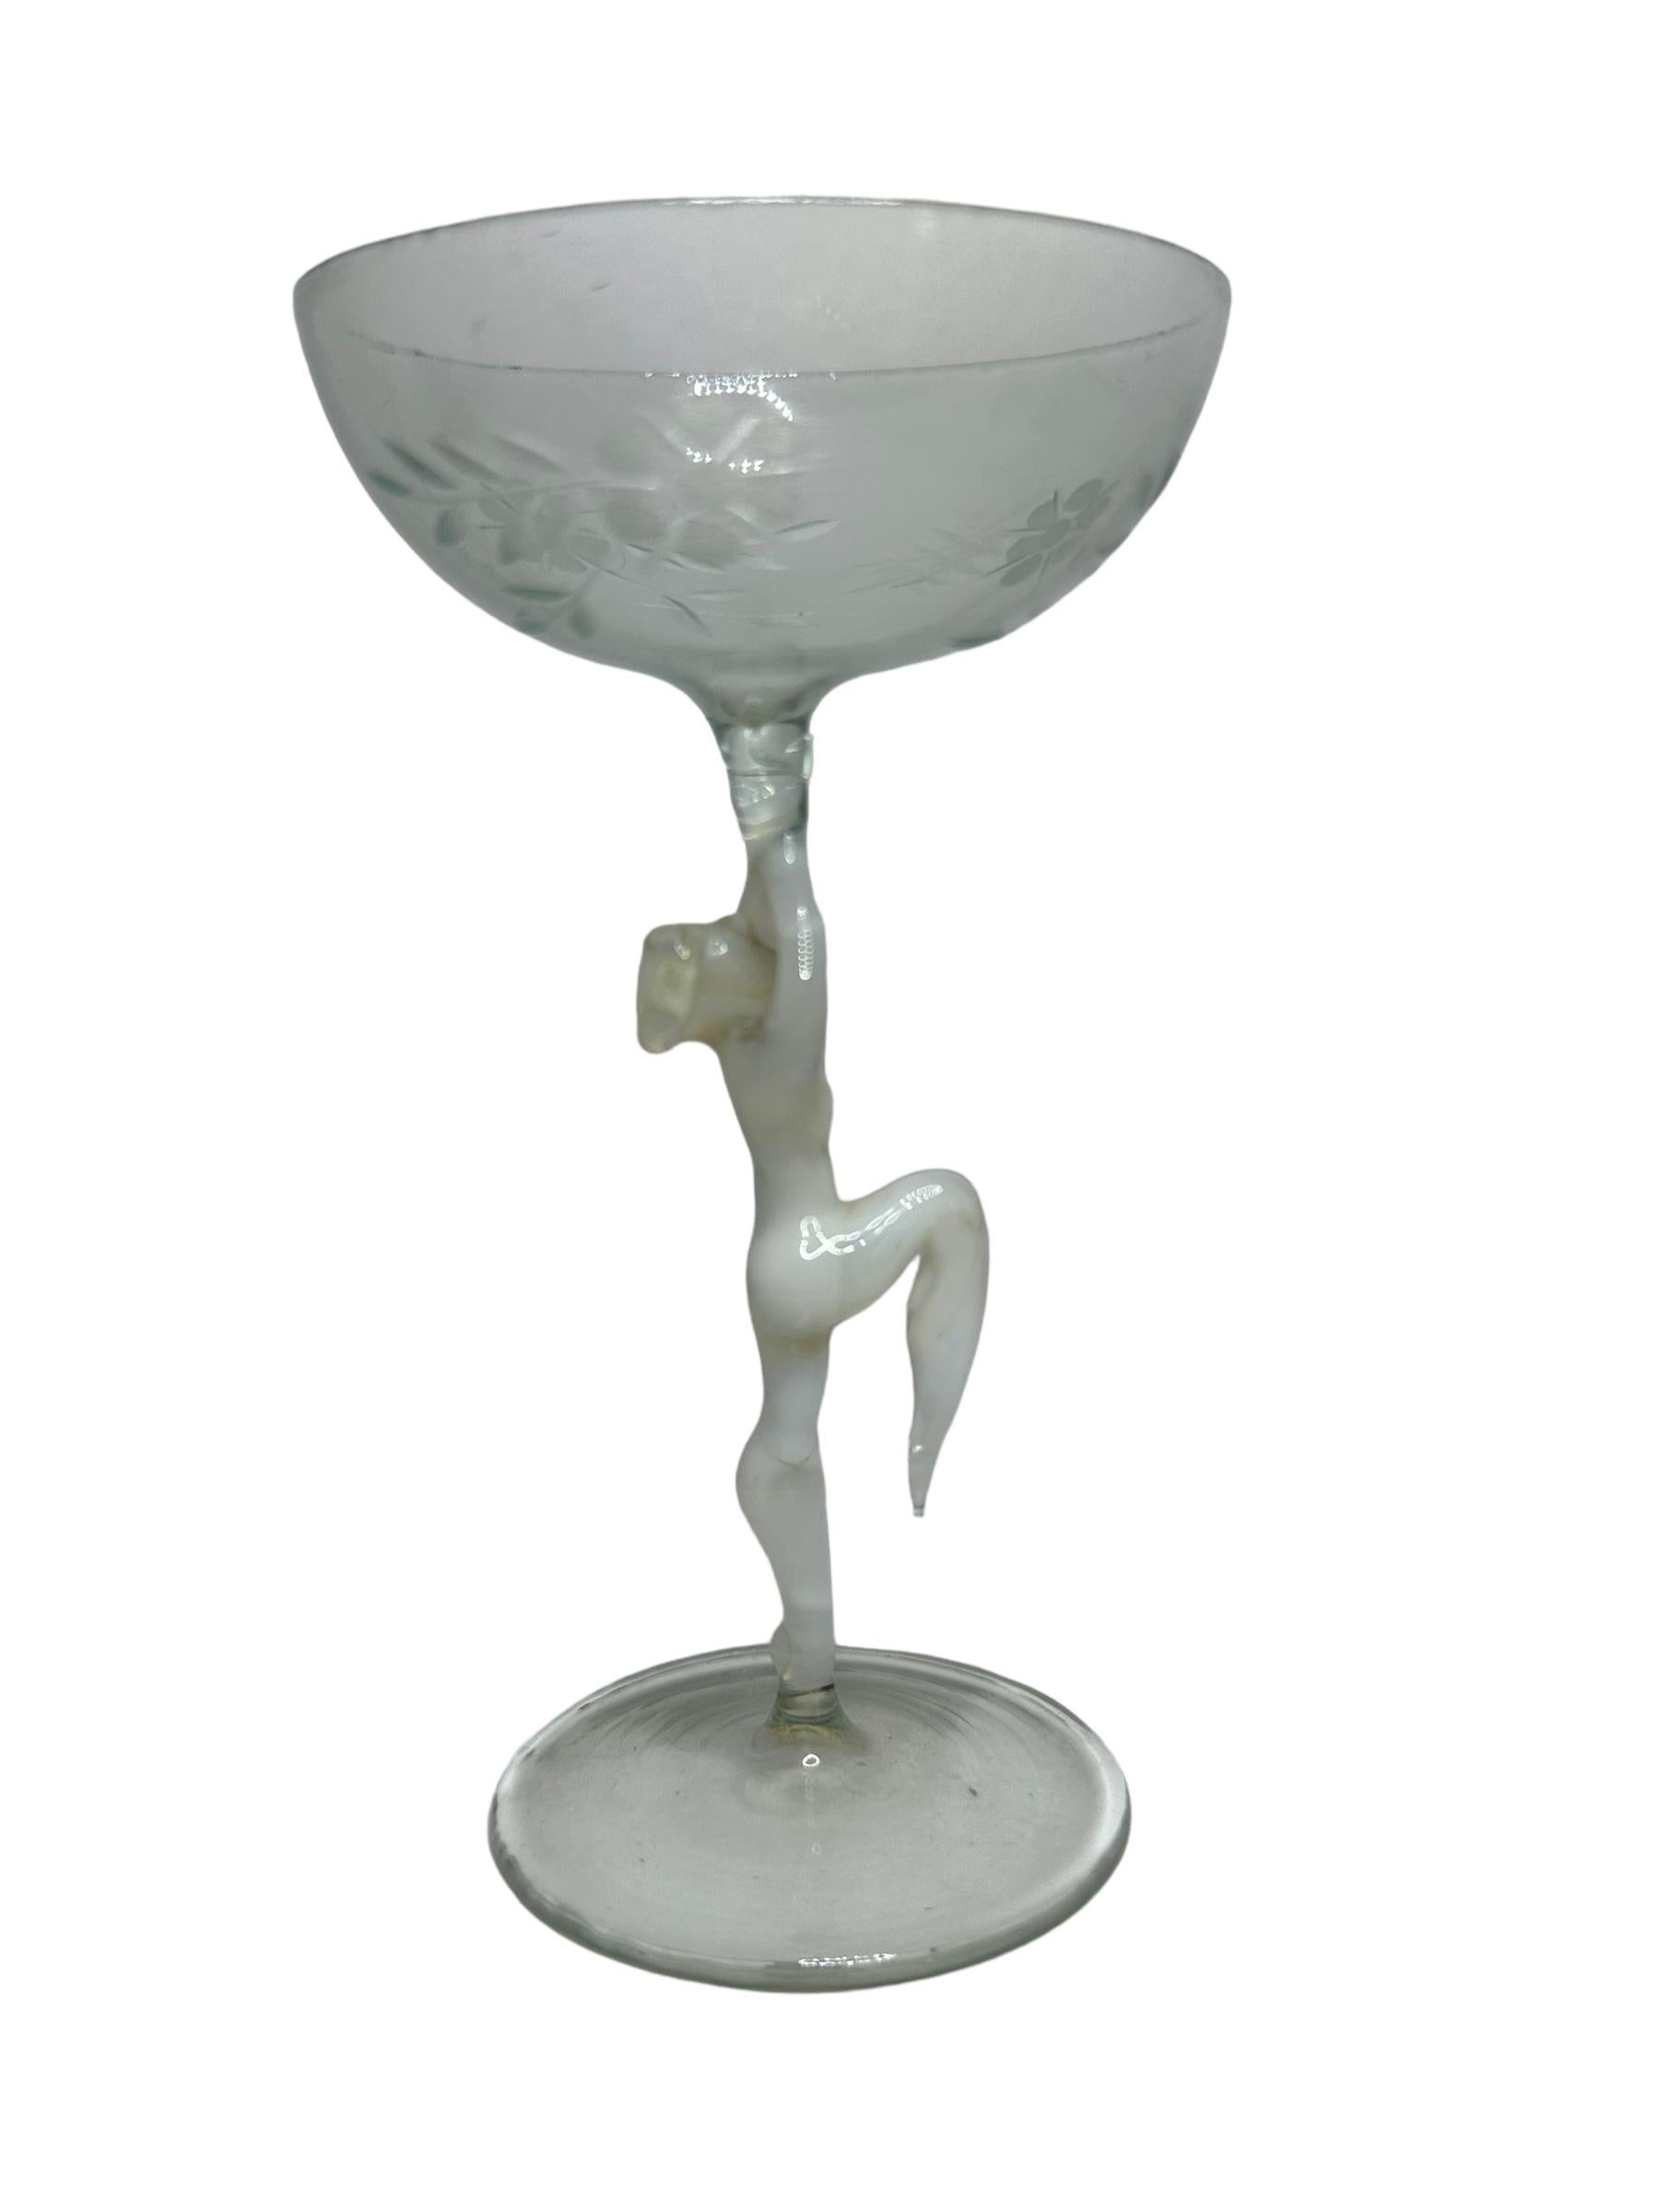 This is a beautiful single vintage stemmed liqueur glass from Austria. It features a bare women's shaft and is Bimini art style. The glass has a wonderful design, the stem depicts a nude lady in white color. The base and the top is a beautiful clear